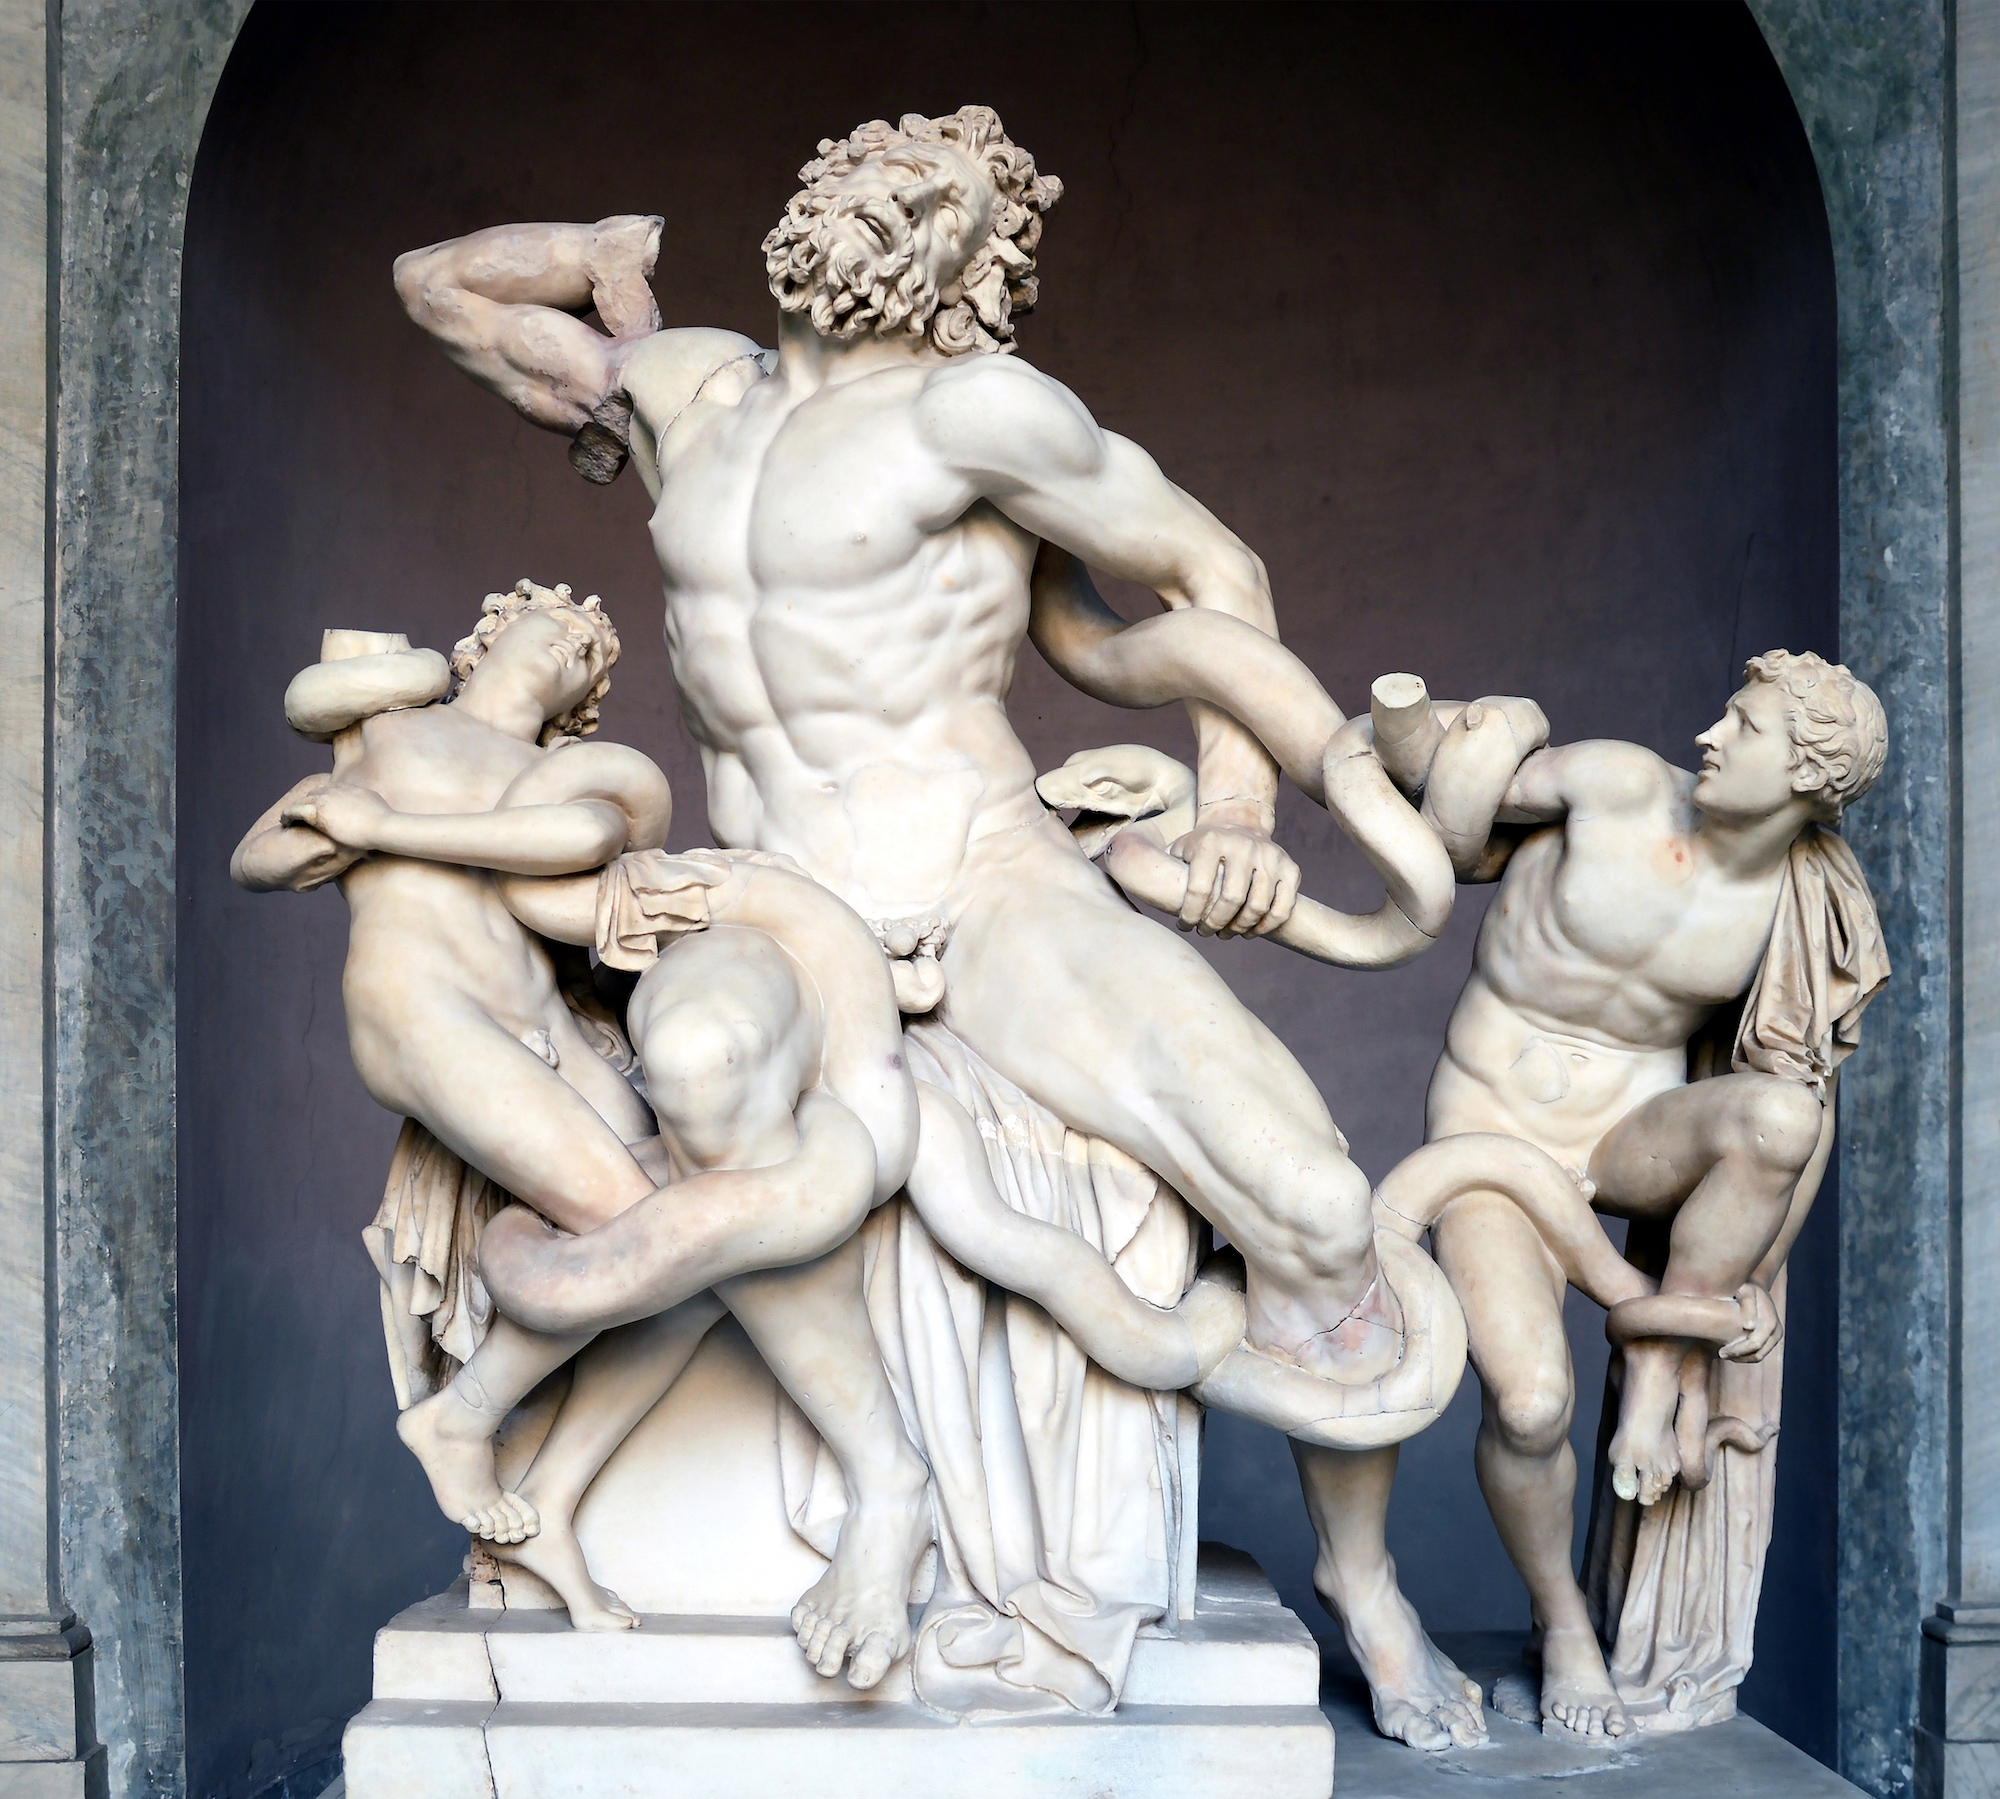 A white marble statue of the mythical Laocoon group displaying a muscular bearded man with two smaller figures poised on either side and snakes writhing between all of them.